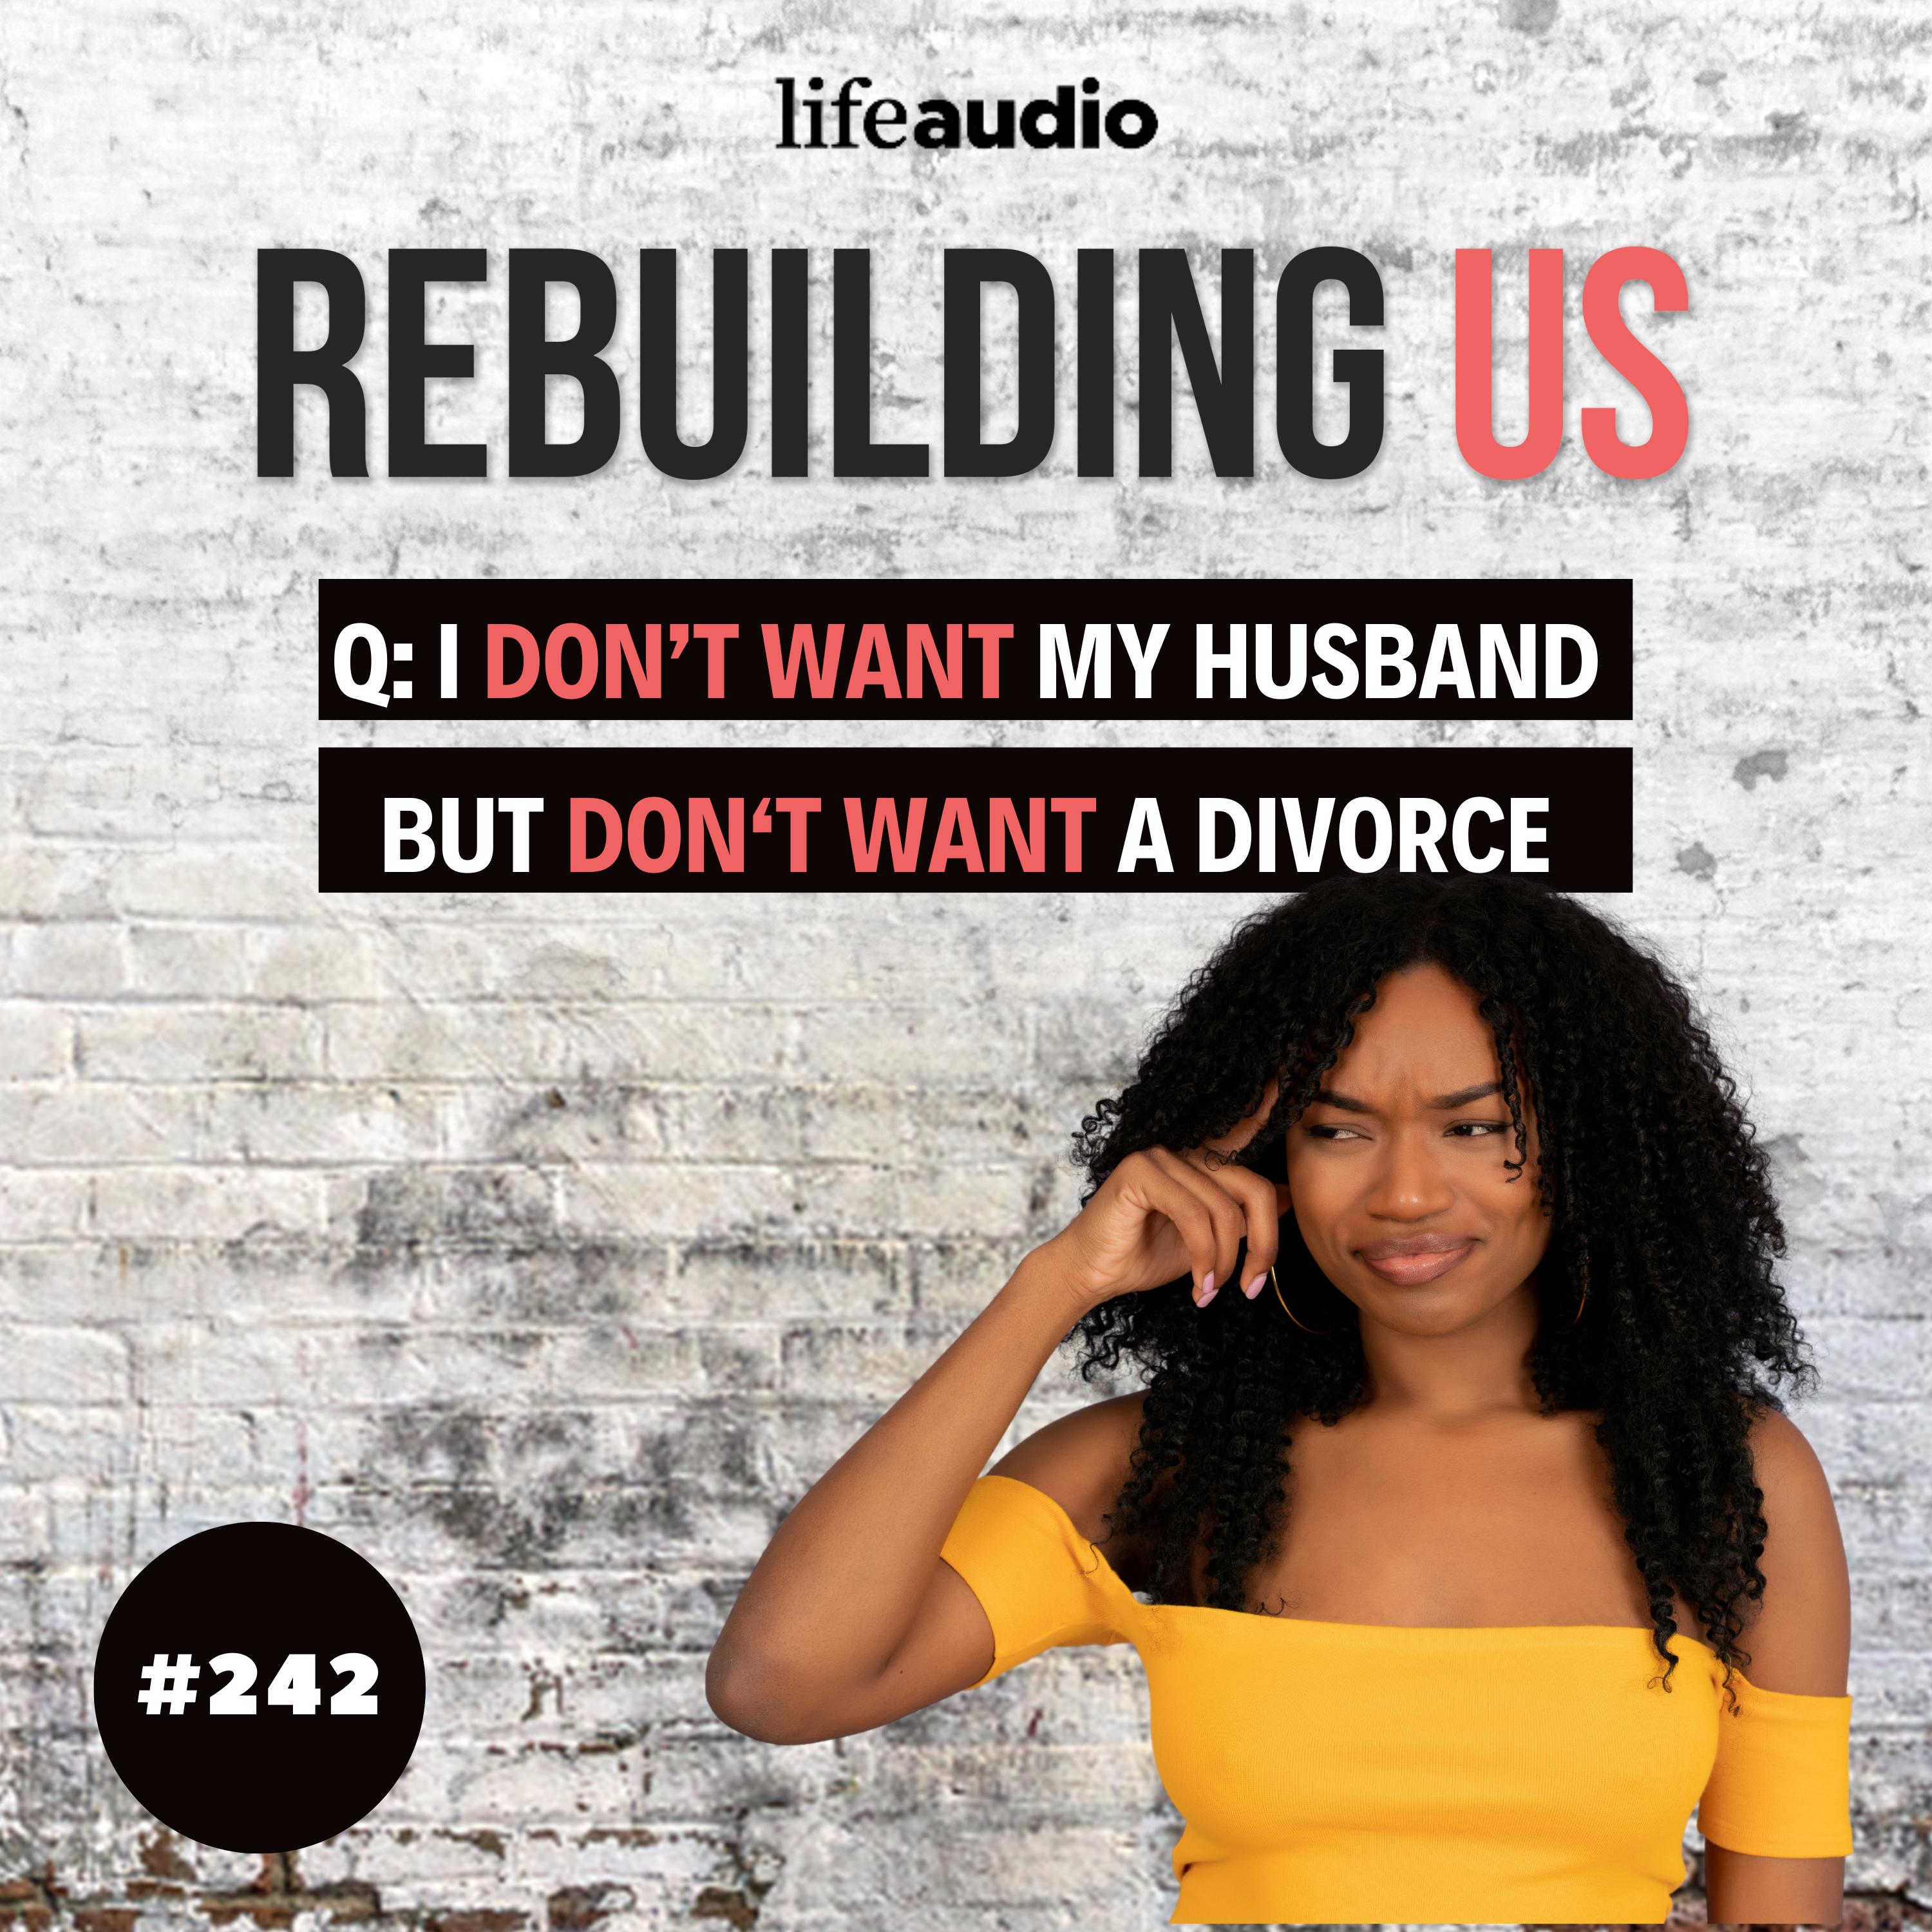 Q & A: I Don't Want My Husband But I Don't Want a Divorce Either